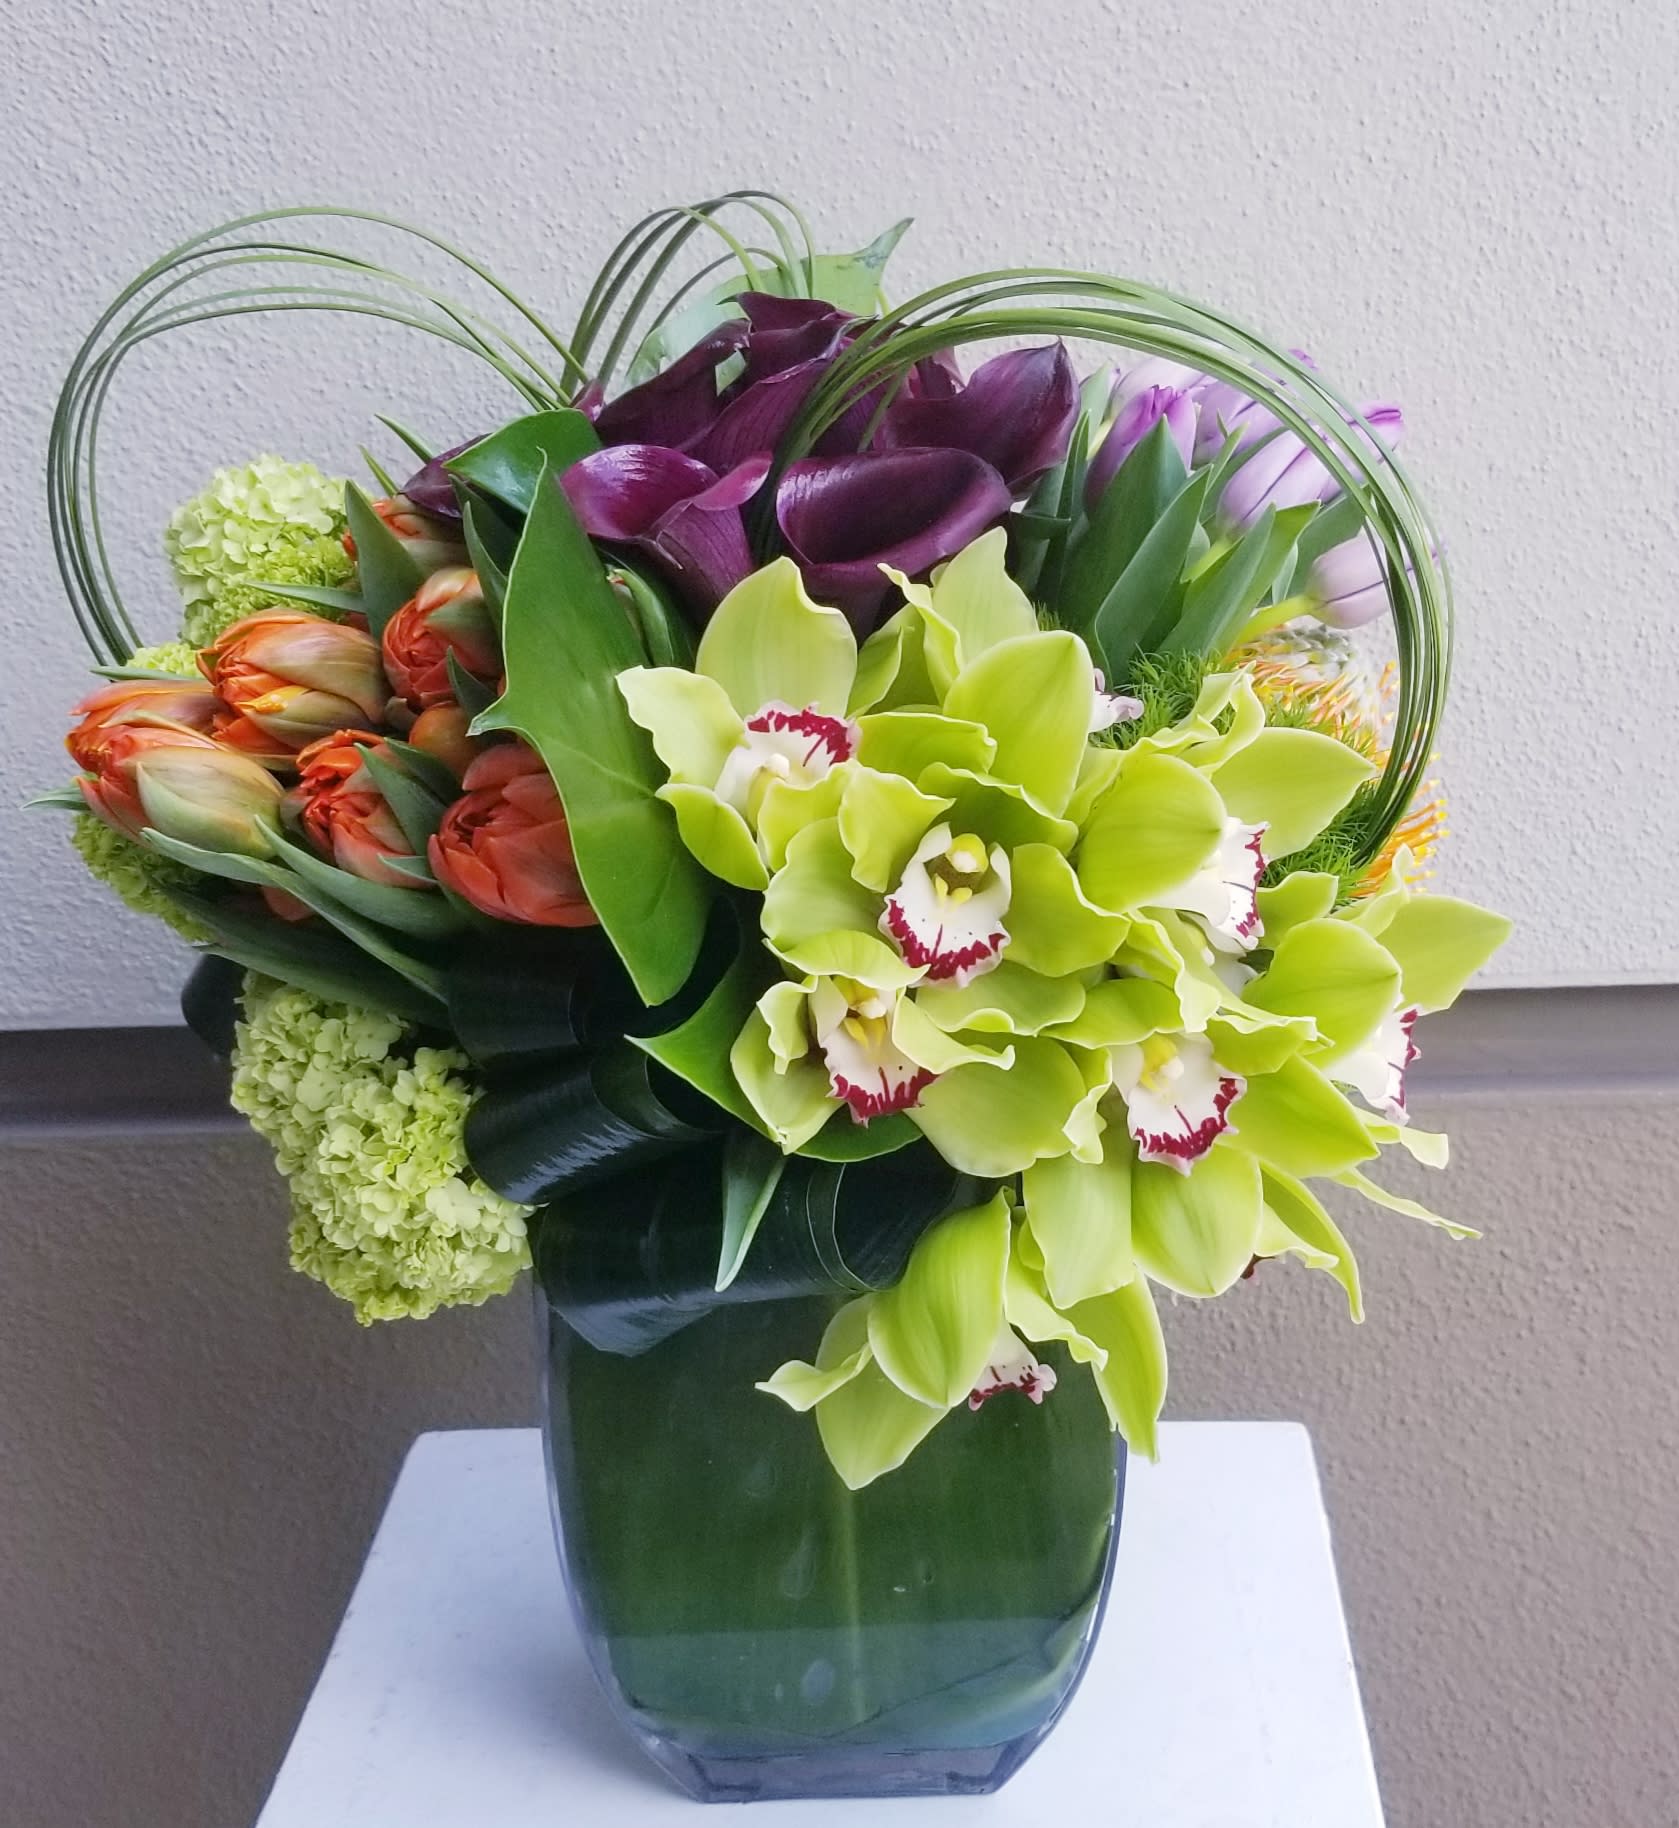 Selena - low colorful exotic arrangement composed of plum mini callas, tulips and cymbidium orchids. It also had folded tropical leaves and grass loops.